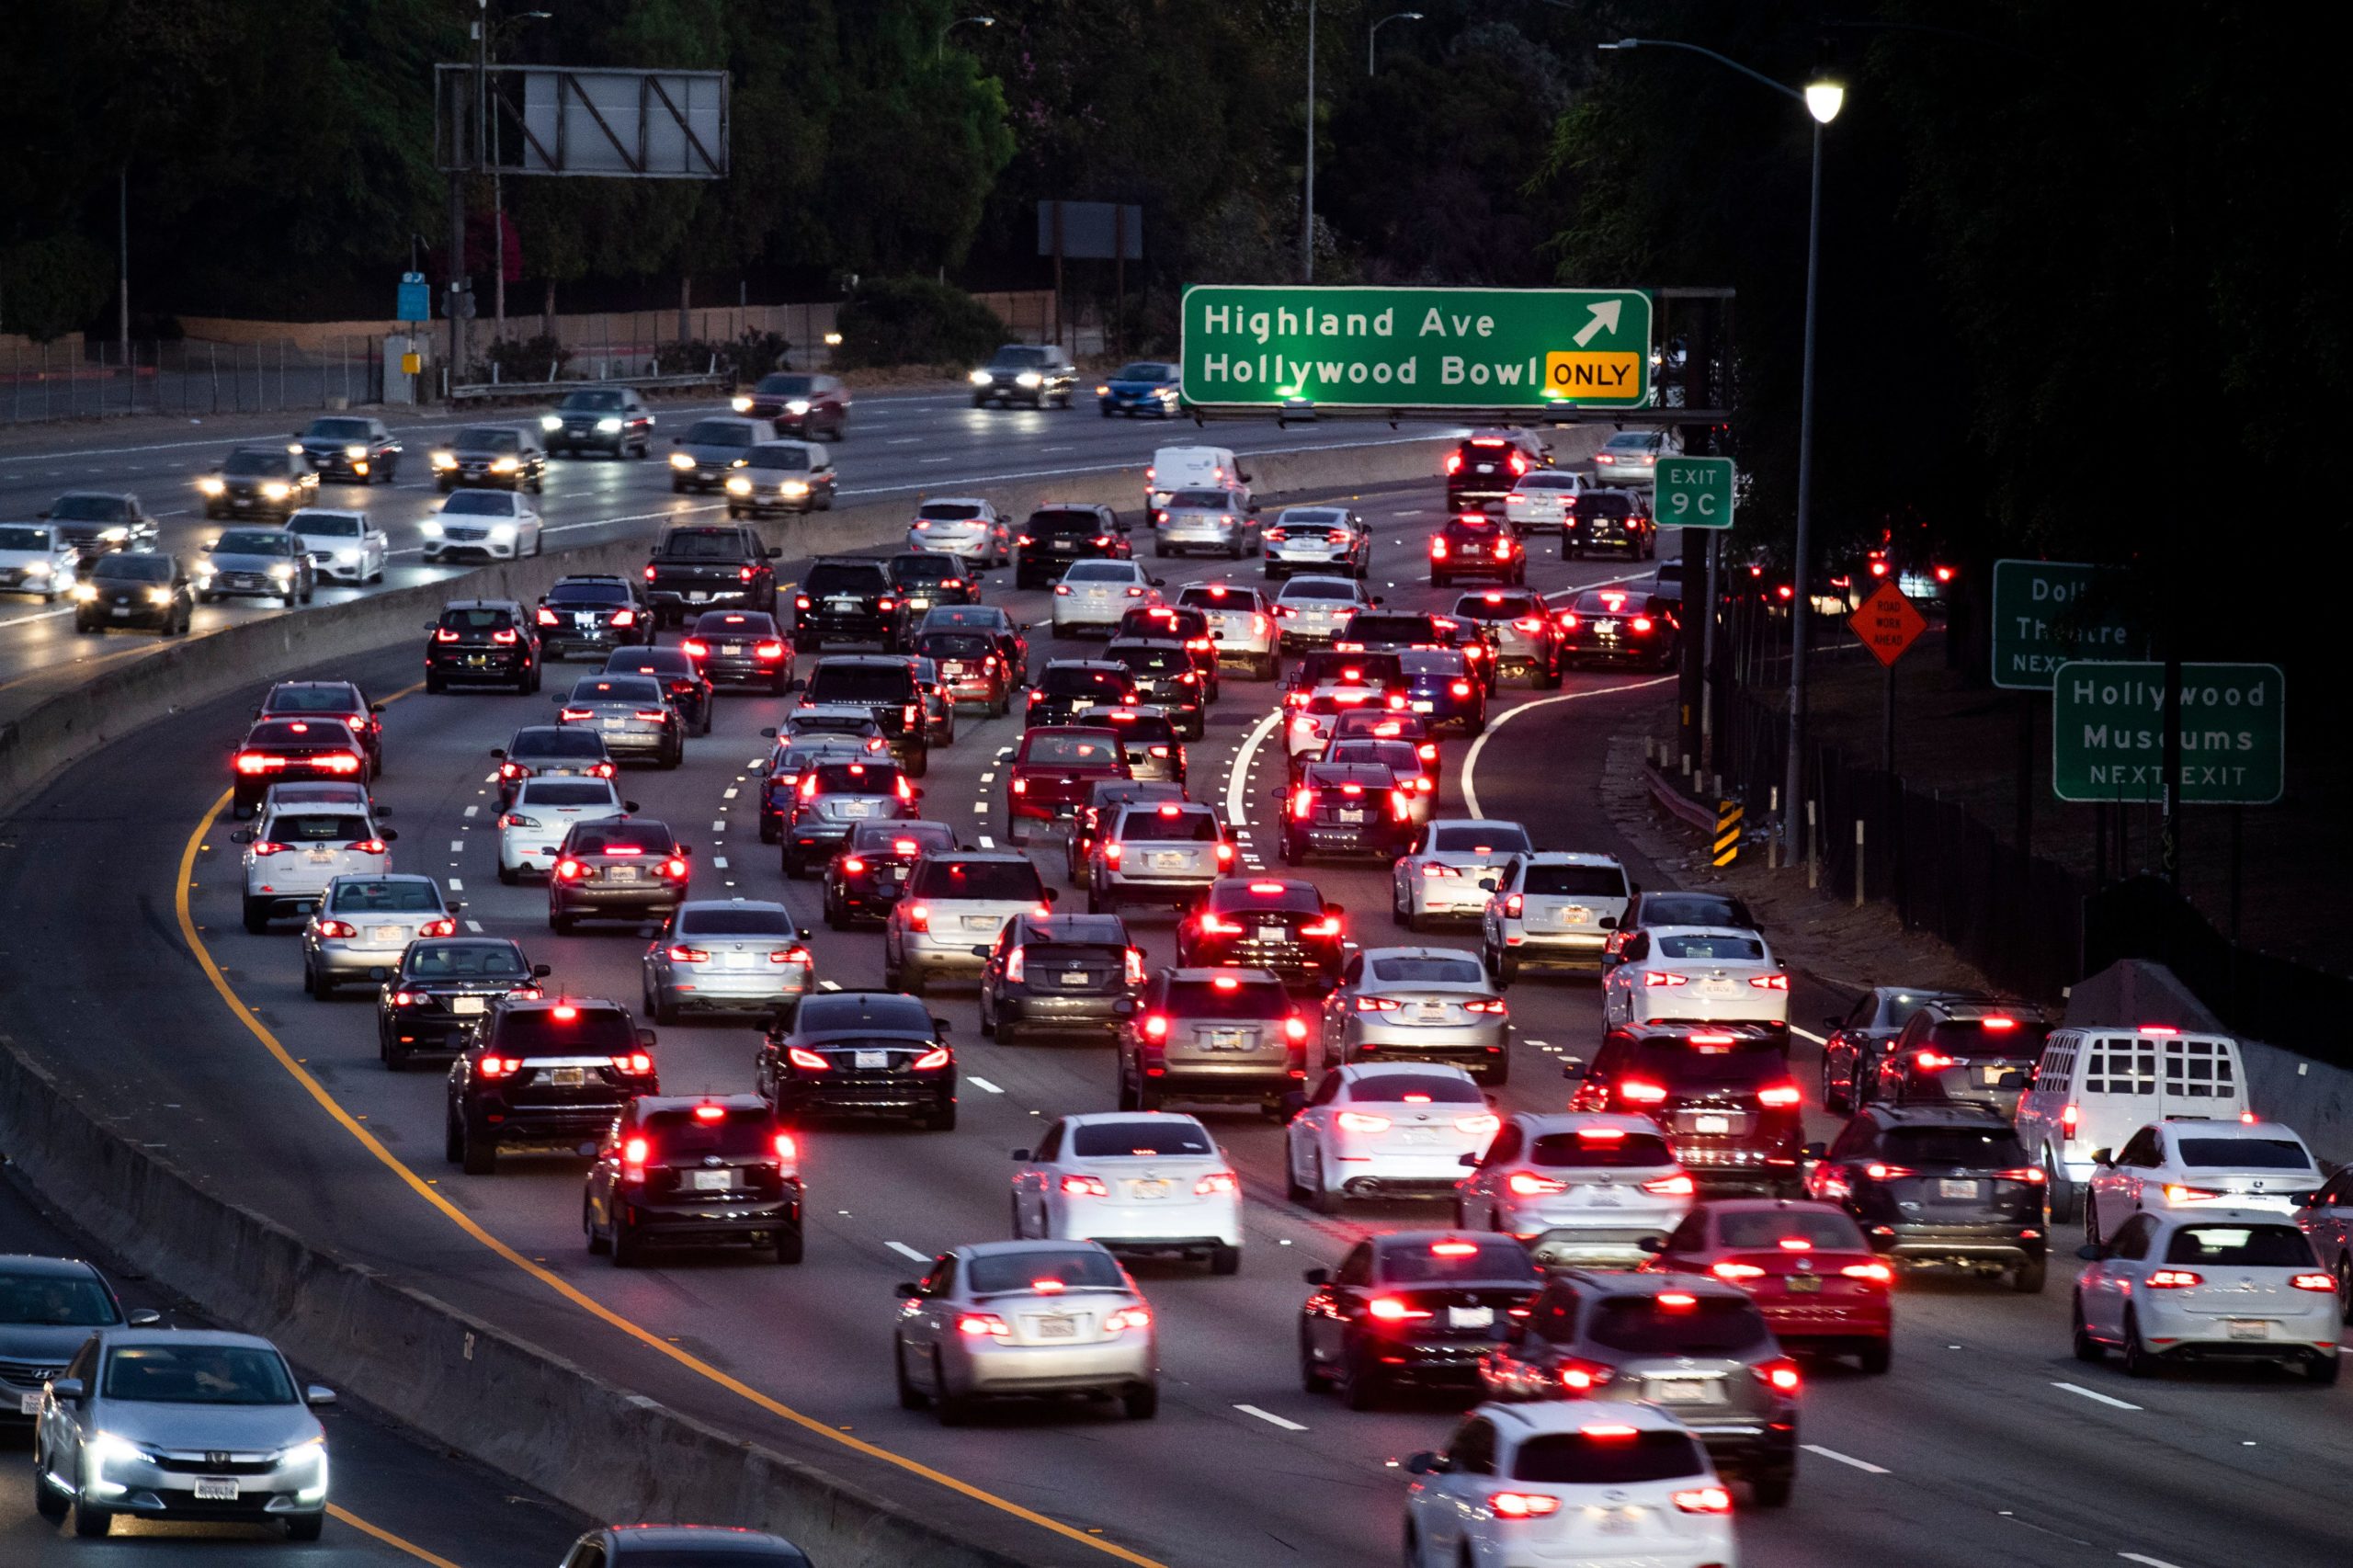 Motor vehicles drive on the 101 freeway in Los Angeles, California on Sept. 17, 2019. (Robyn Beck/AFP via Getty Images)